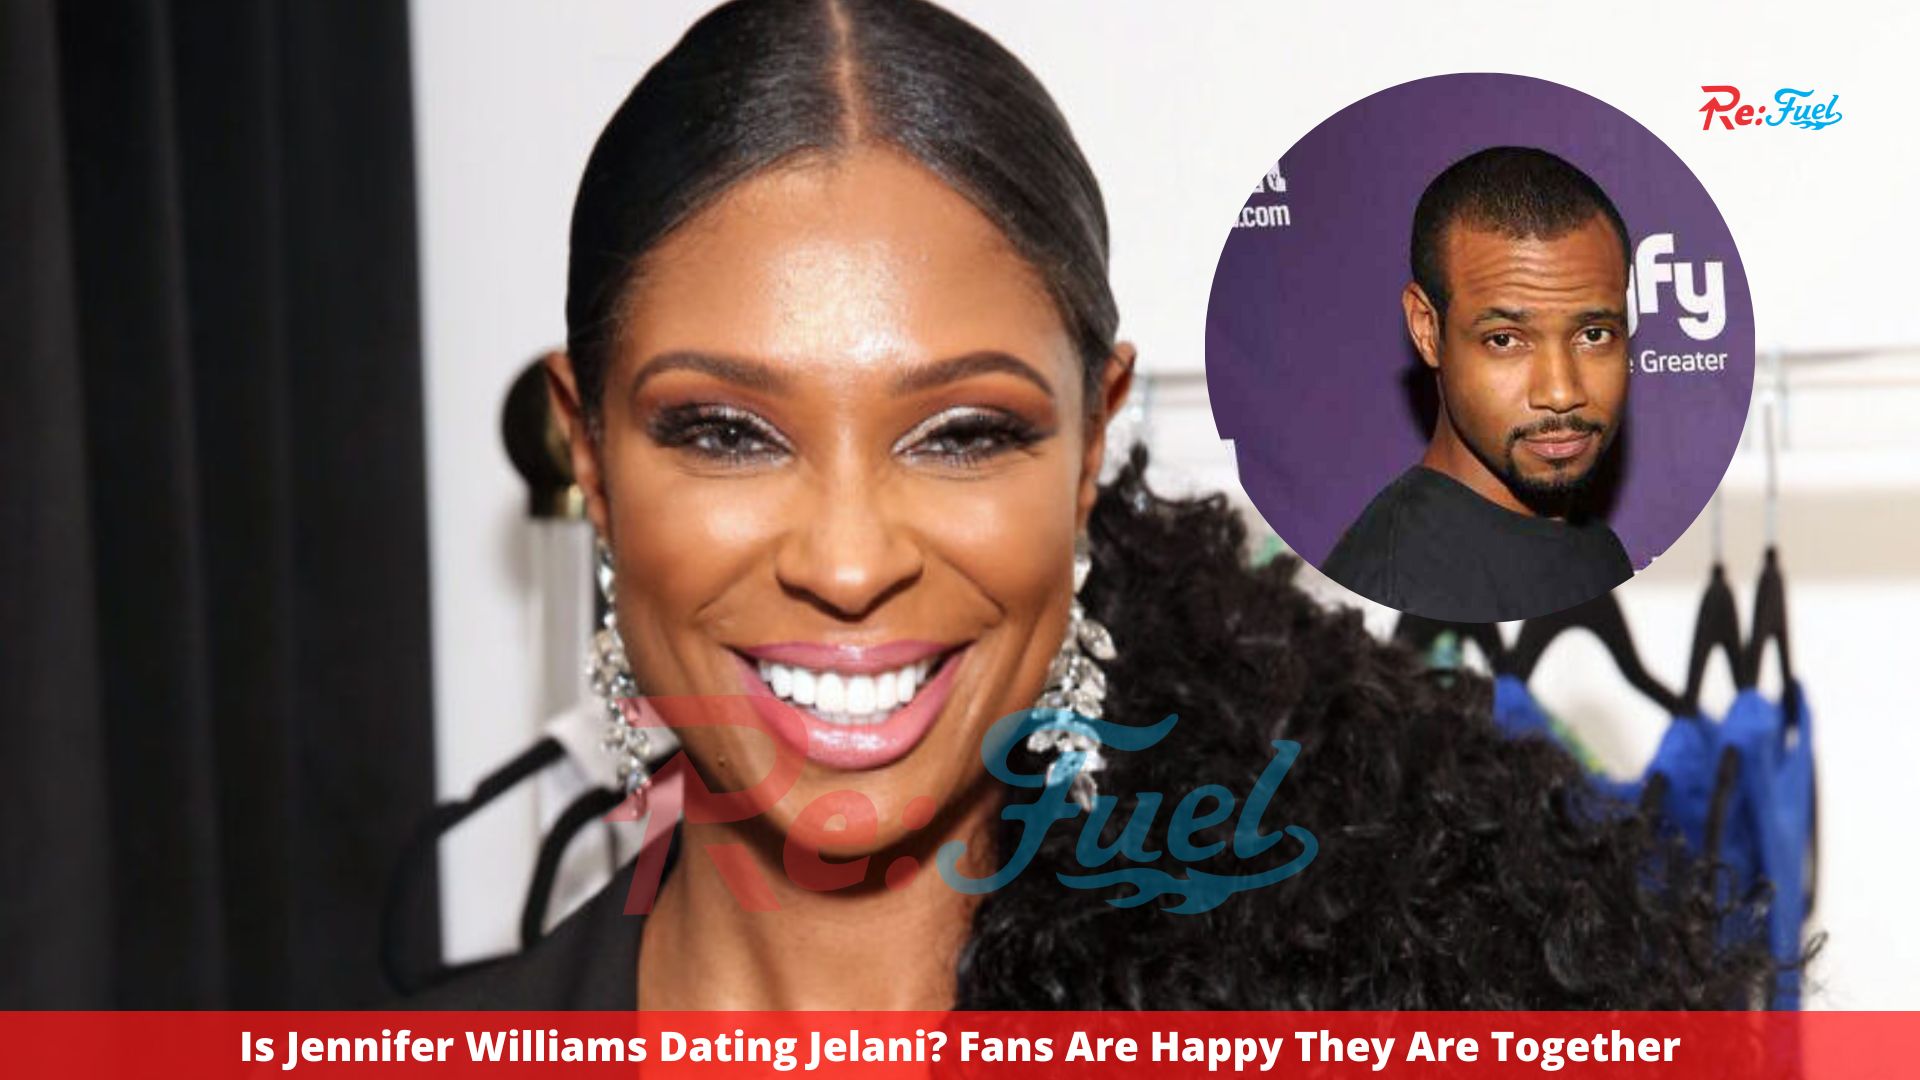 Is Jennifer Williams Dating Jelani? Fans Are Happy They Are Together